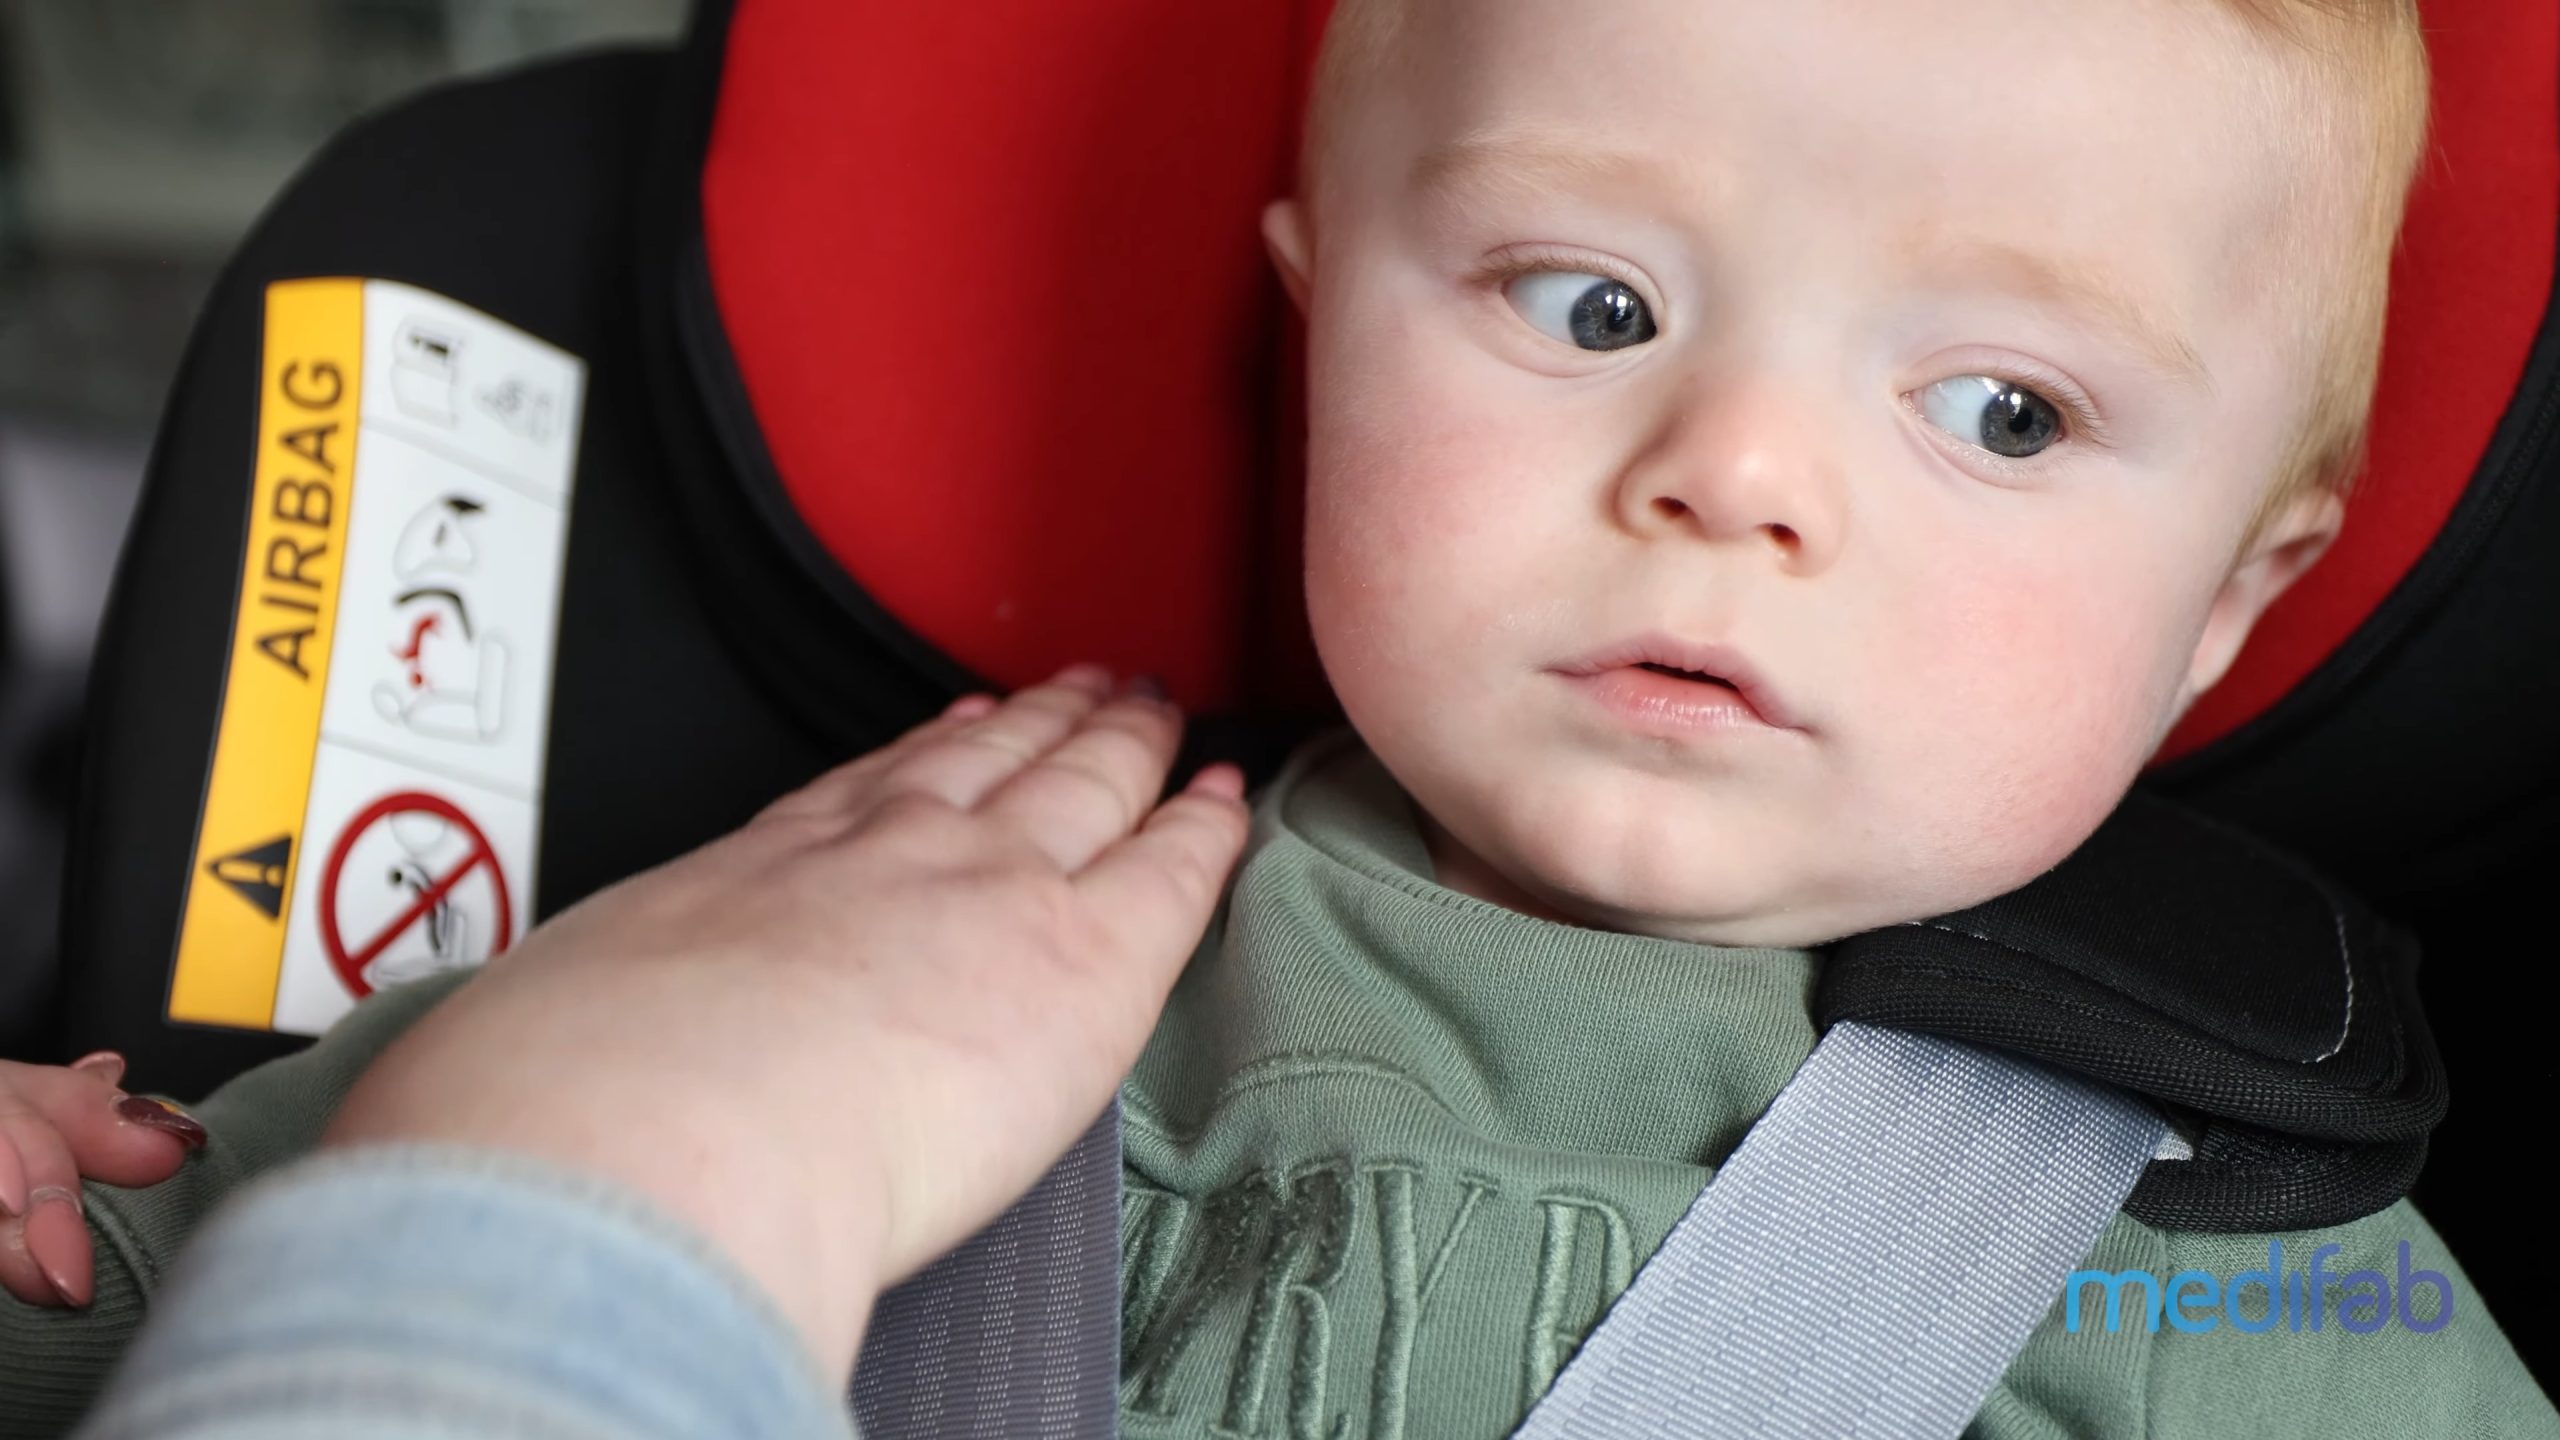 Hero NXT Car seat use with toddler in it